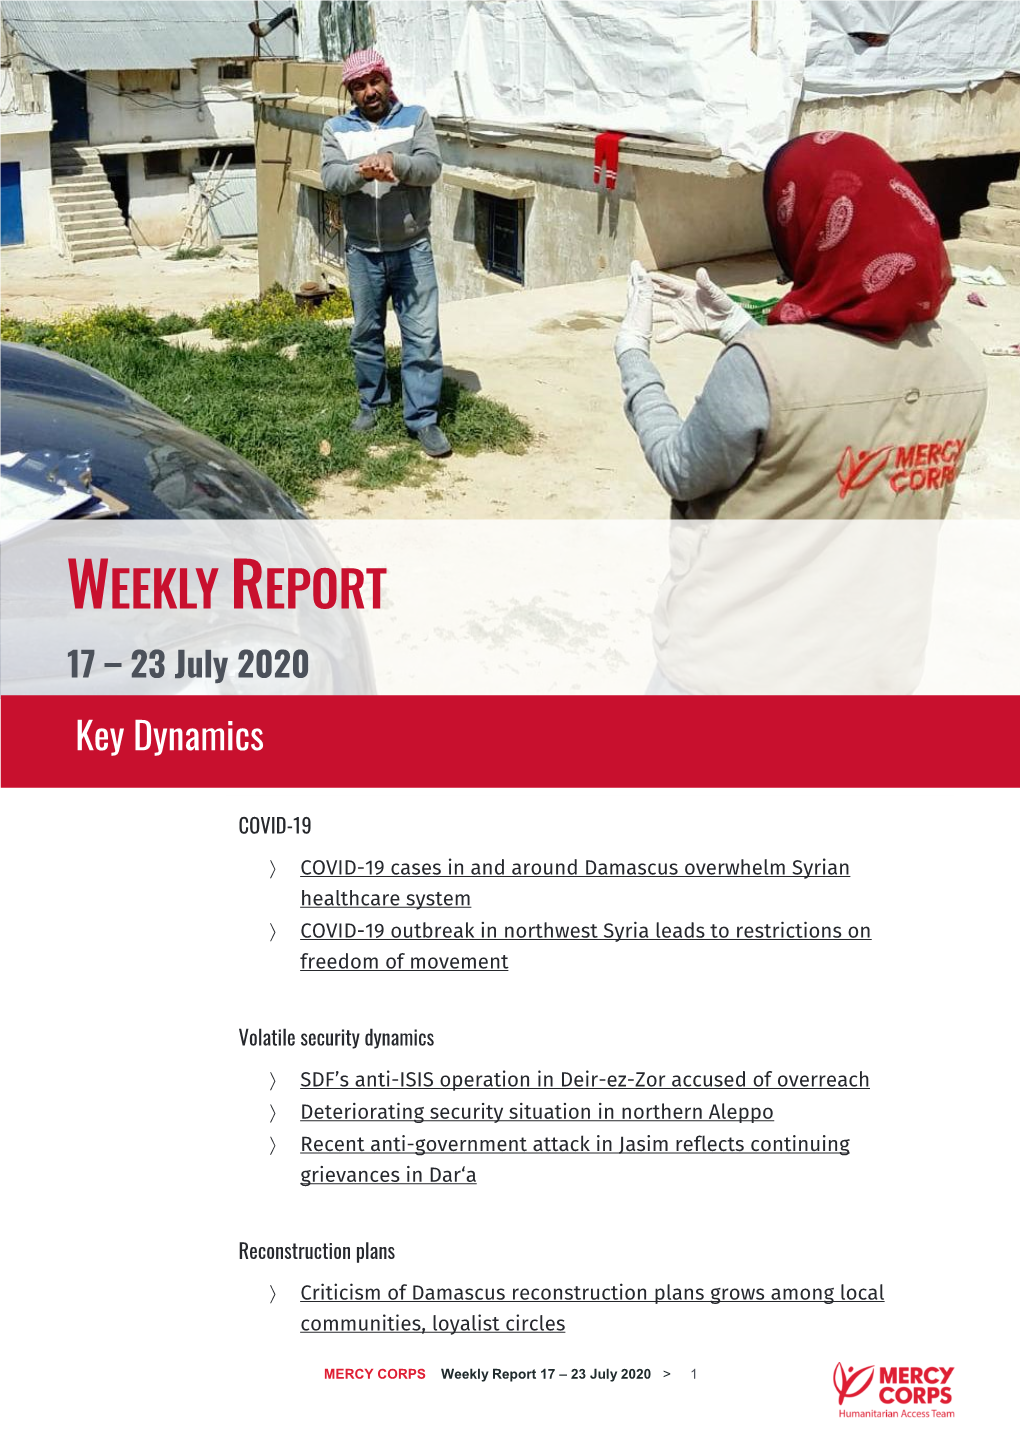 Humanitarian Access Team's Weekly Report 17-23 July, 2020